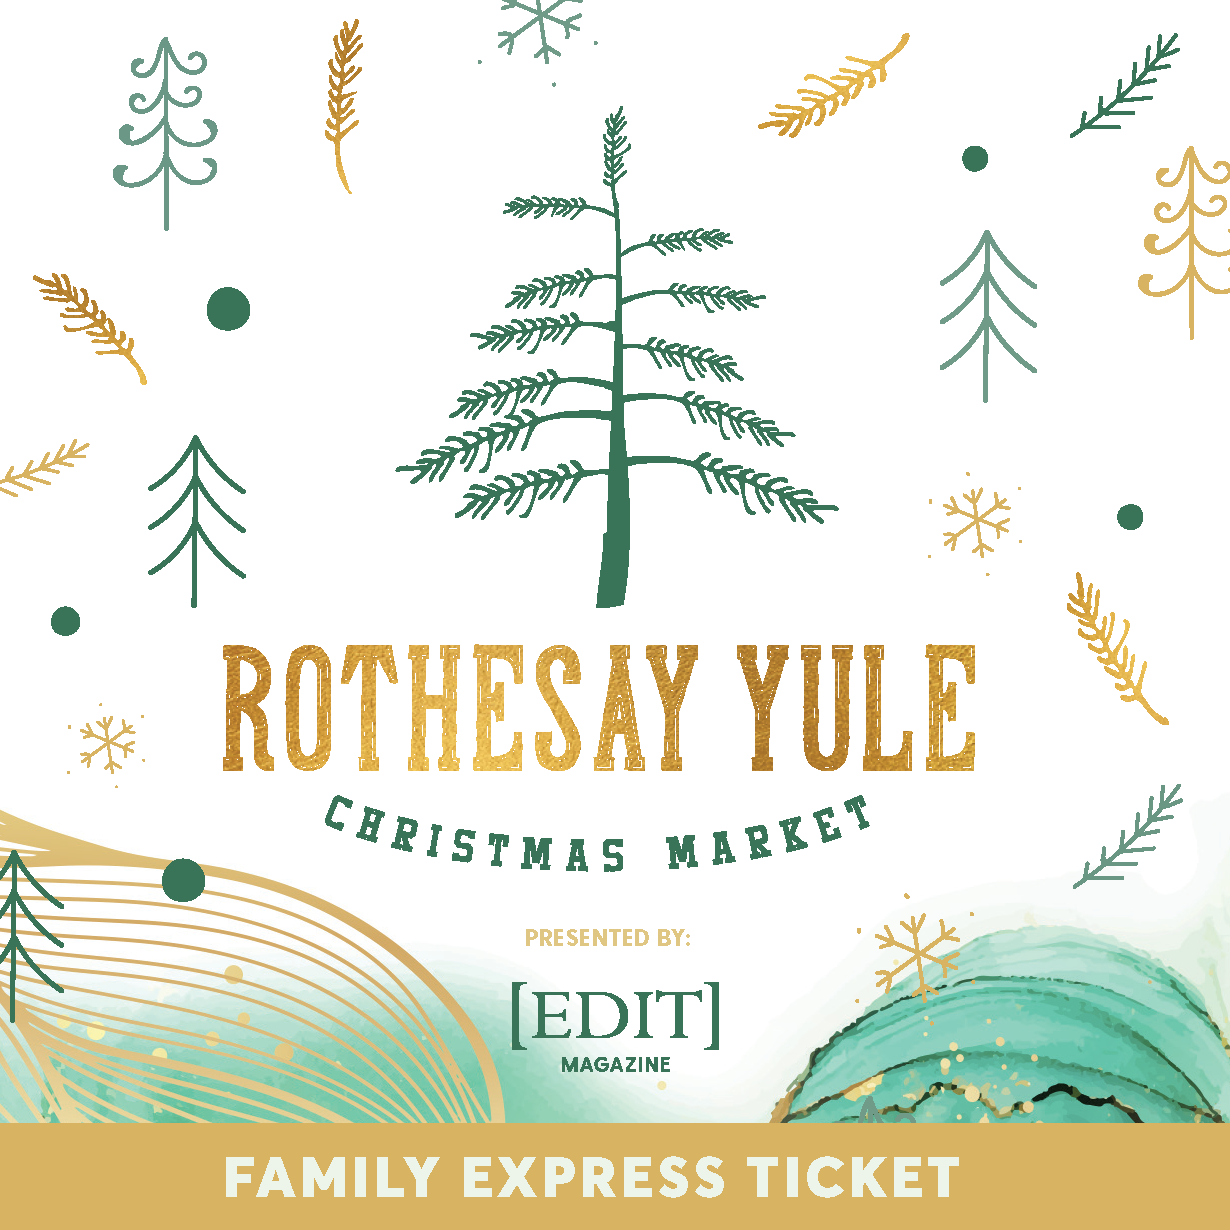 The Rothesay Yule Family Express Ticket